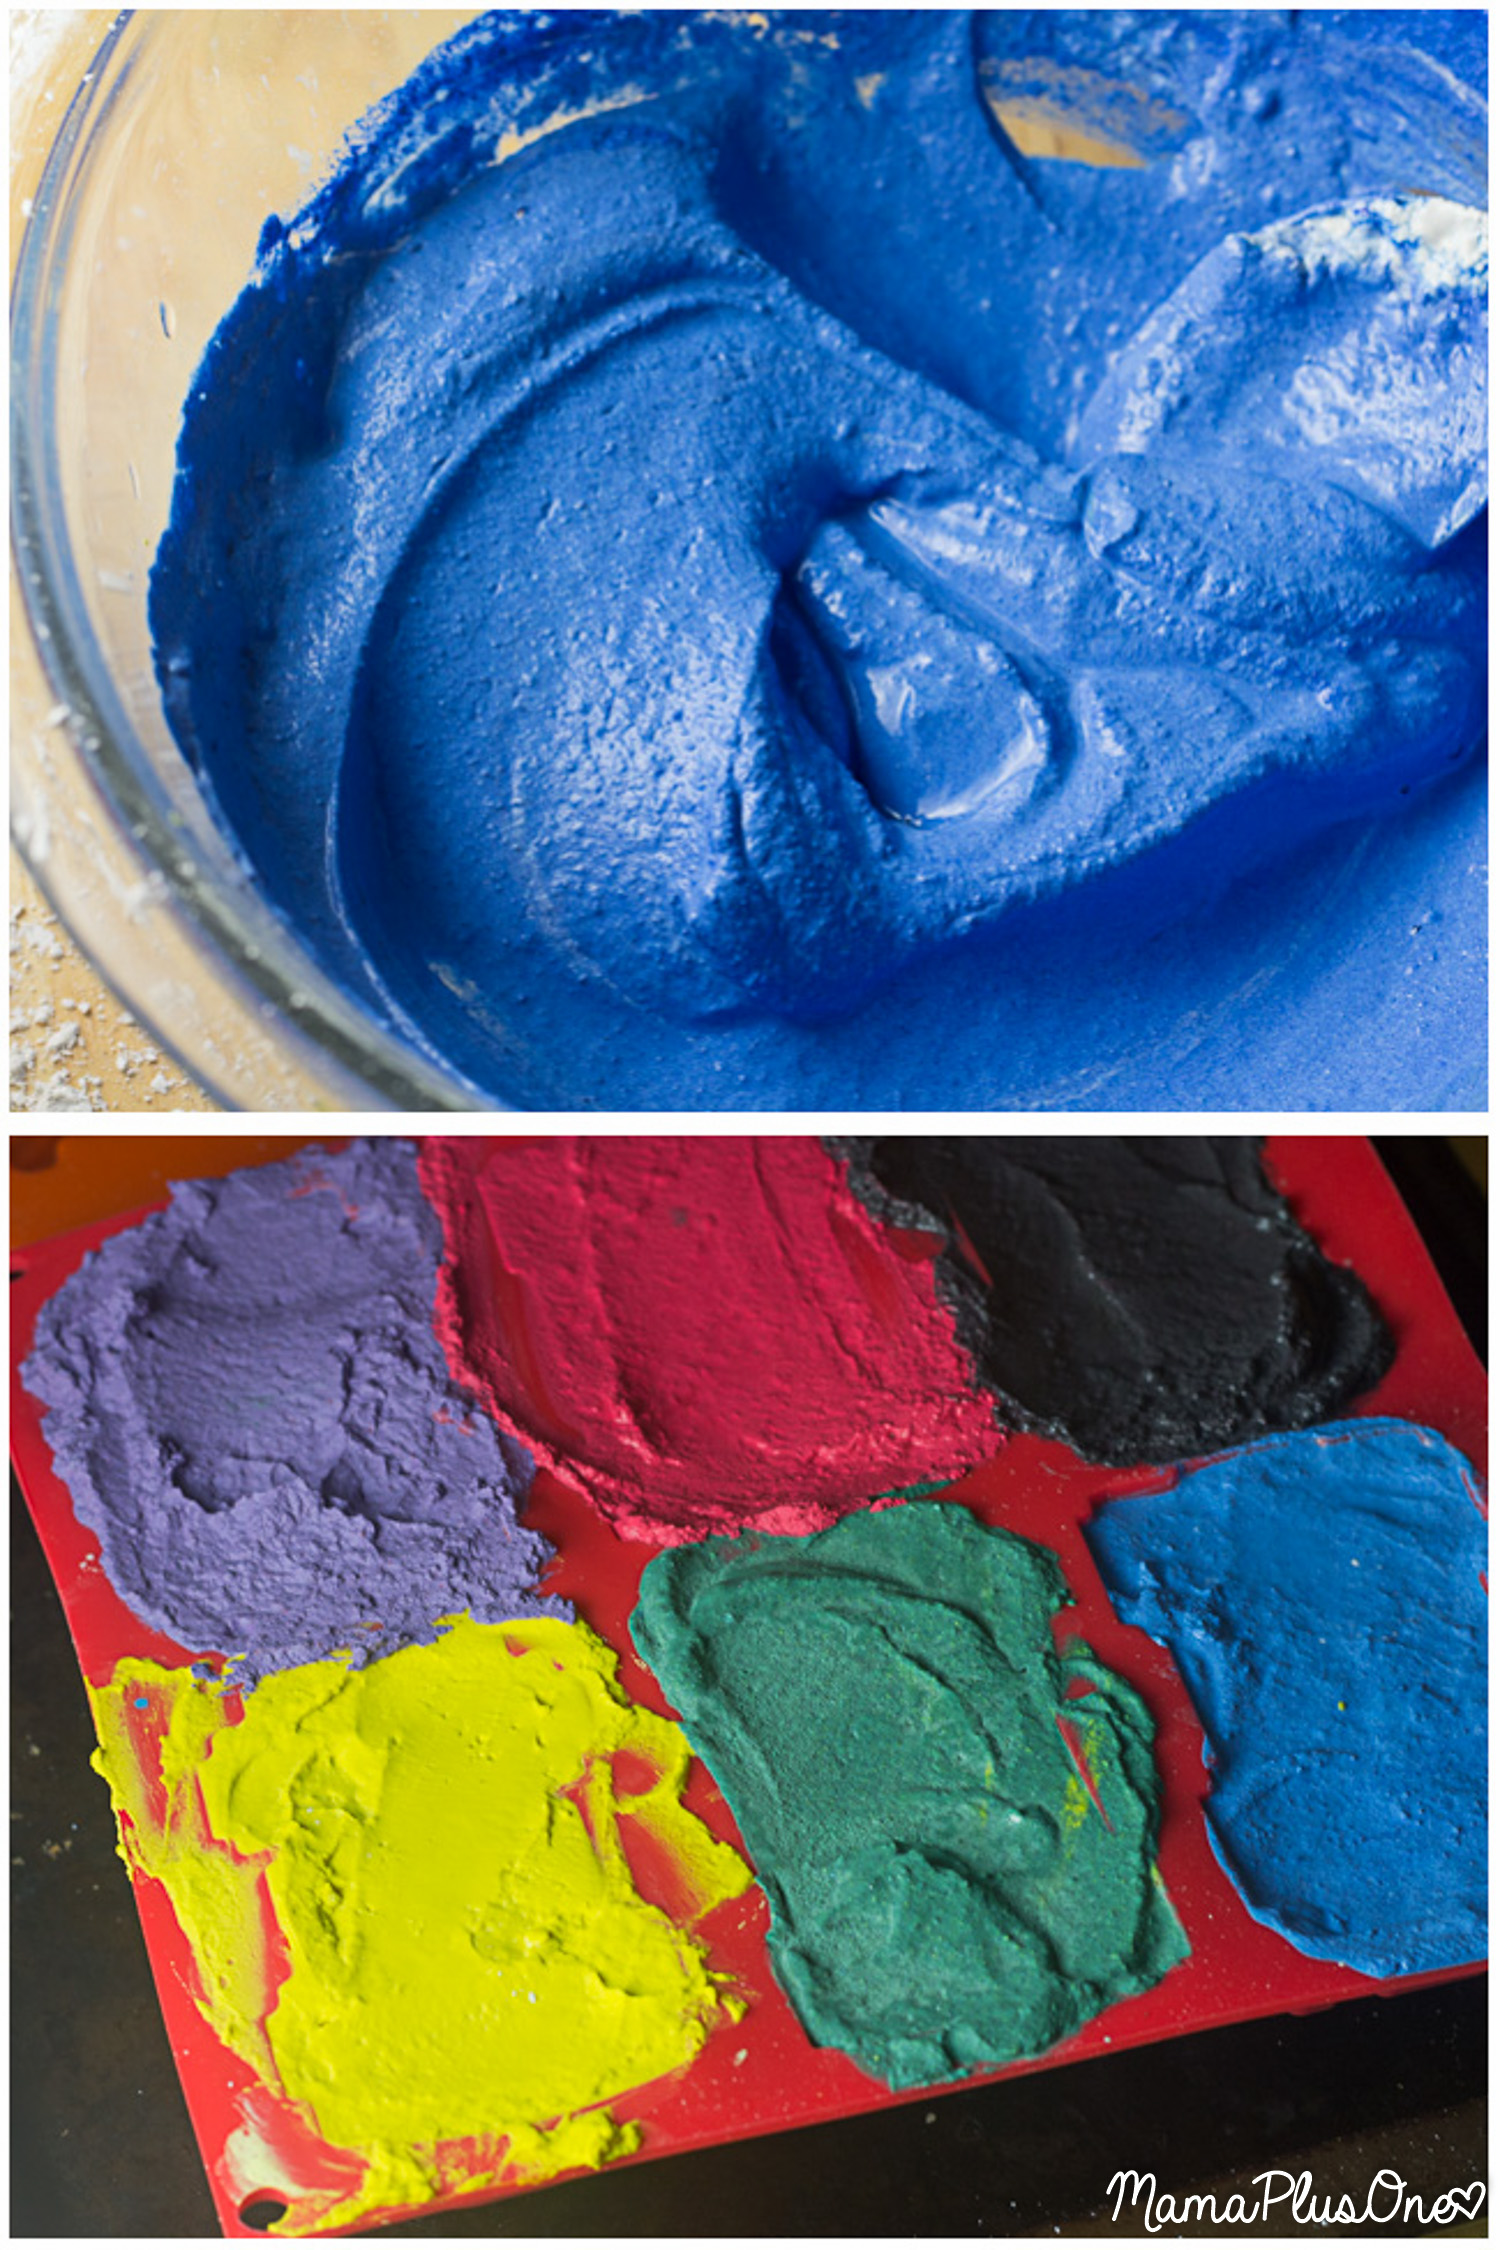 DIY Chalk is so easy to make-- it's the perfect way to prepare for summer. Simply make your own sidewalk chalk with a few easy-to-find ingredients for a bucketful of chalk that will last you all summer long! This homemade chalk recipe is also perfect for giving fun-shaped chalk pieces as party favors or gifts to friends! You can make your own chalk in any color you can imagine. Perfect kids DIY.